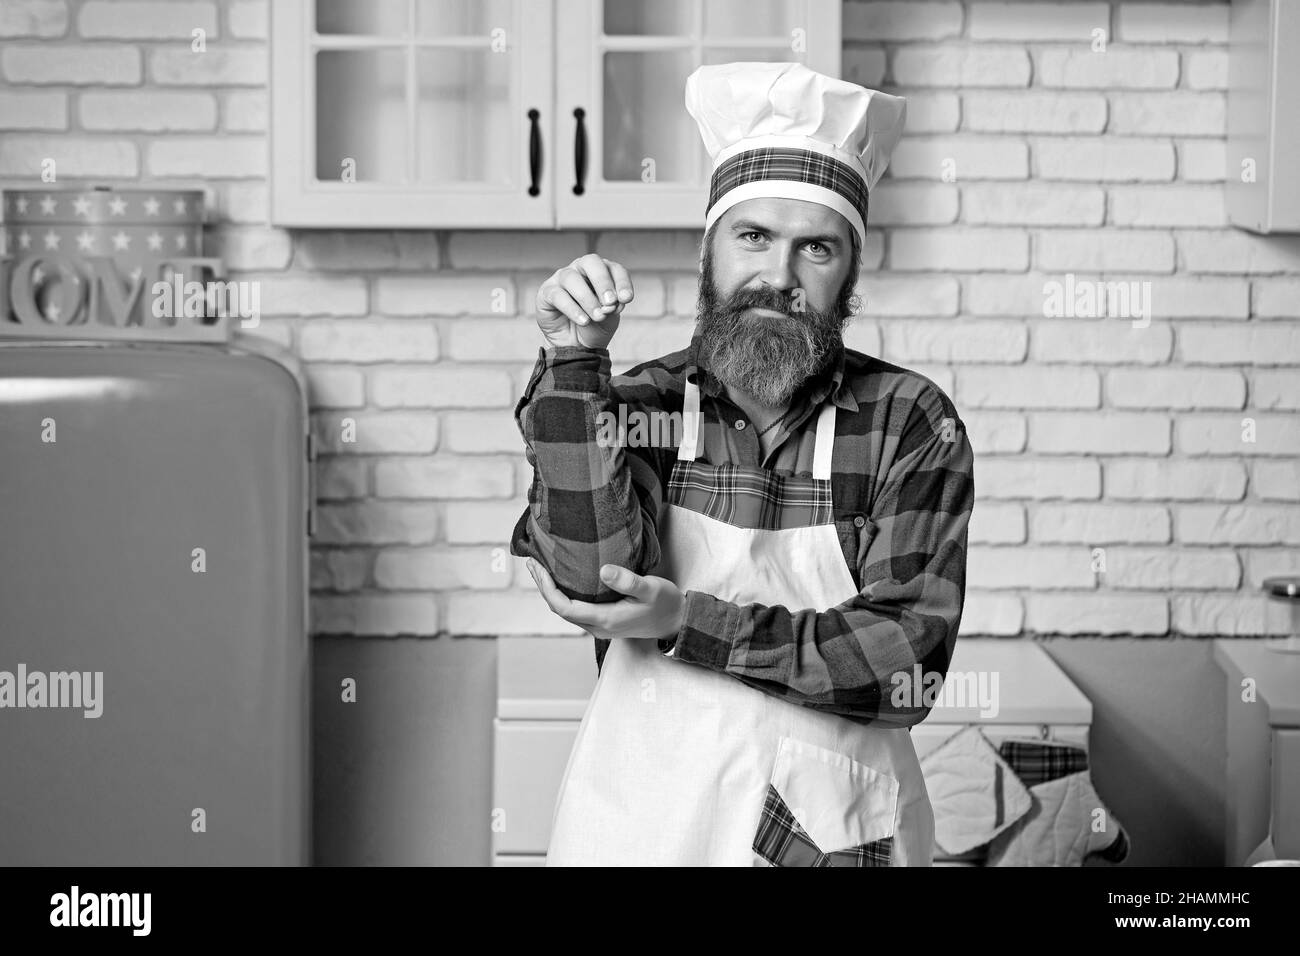 Kitchen spices Black and White Stock Photos & Images - Alamy